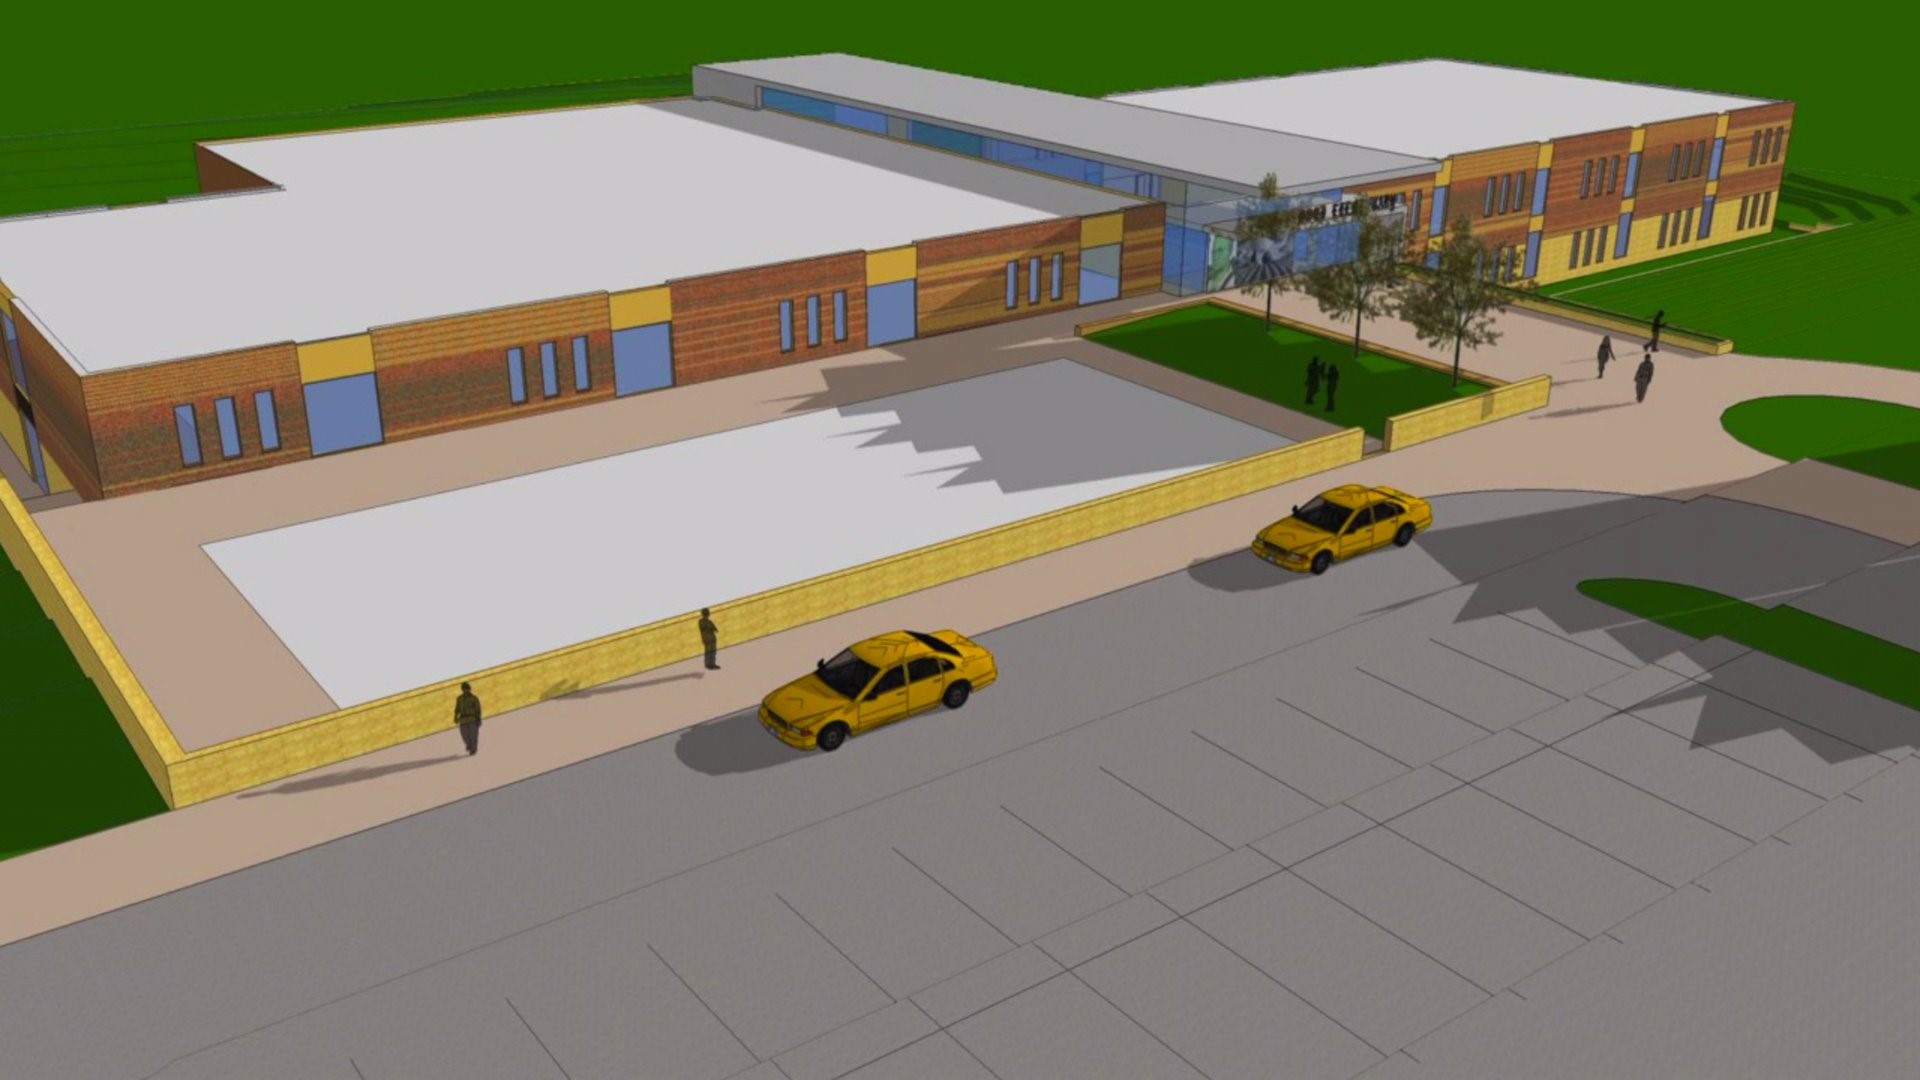 New Grant Wood school construction set to start in August 2017